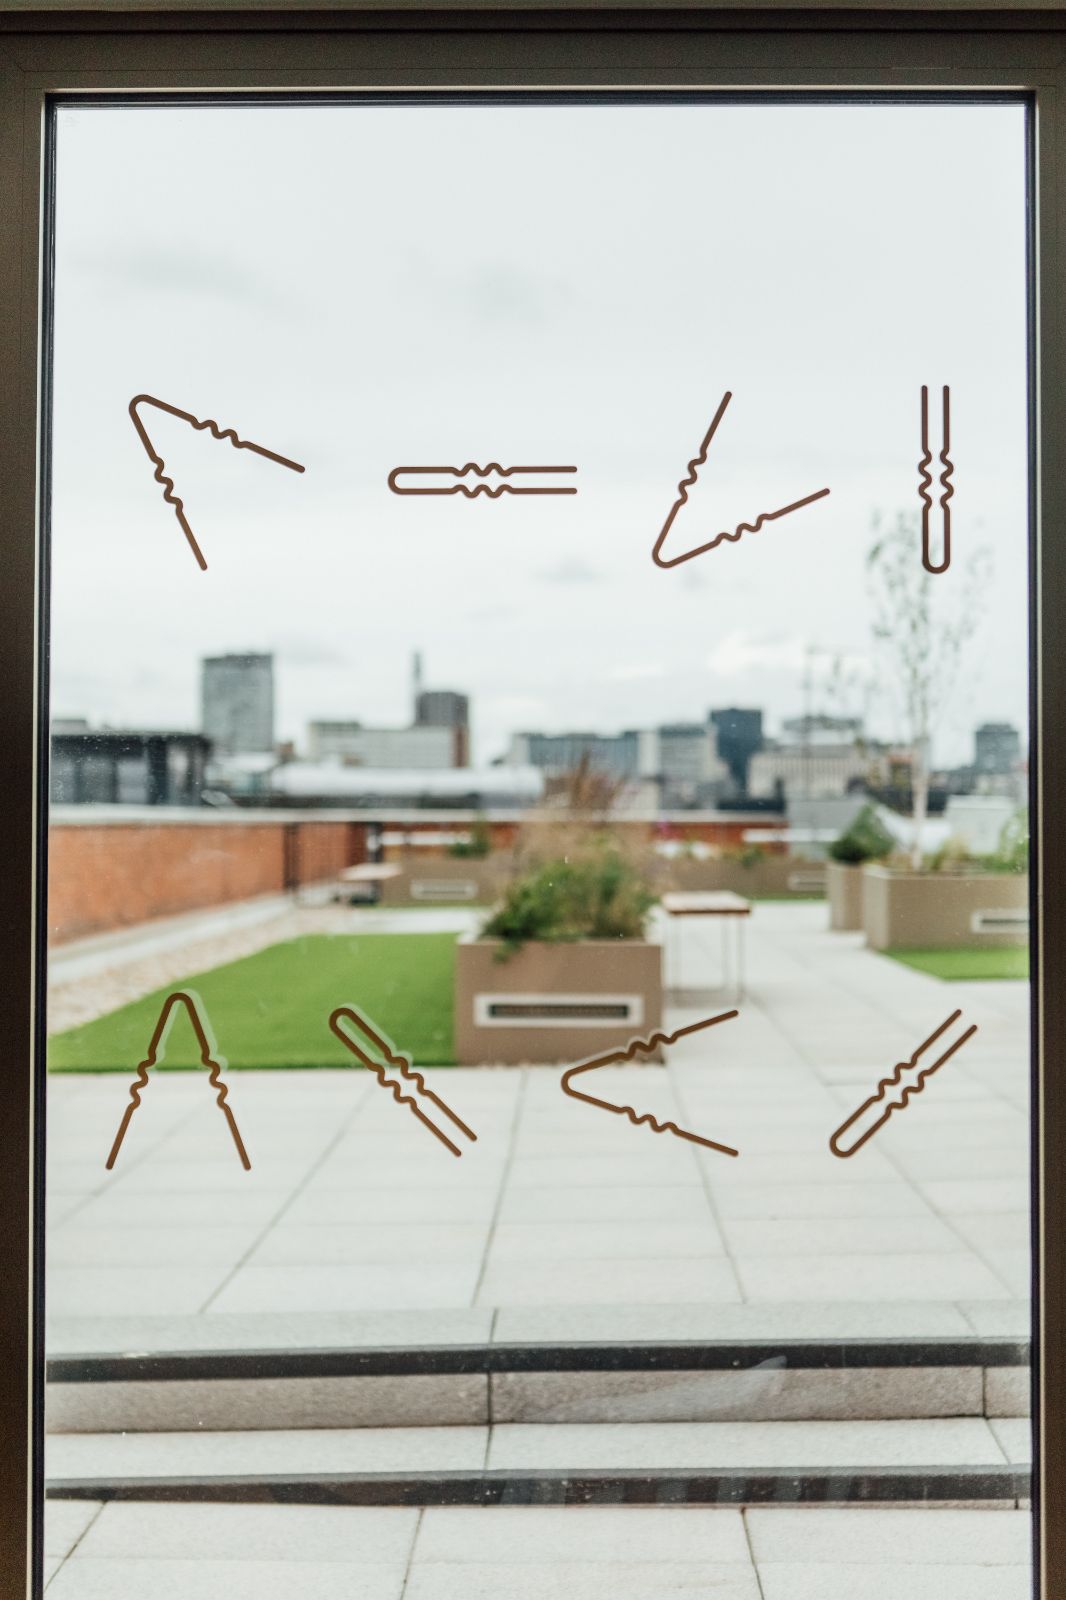 Manifestations of hairpins on the windows. Branding and naming of the building by 93.